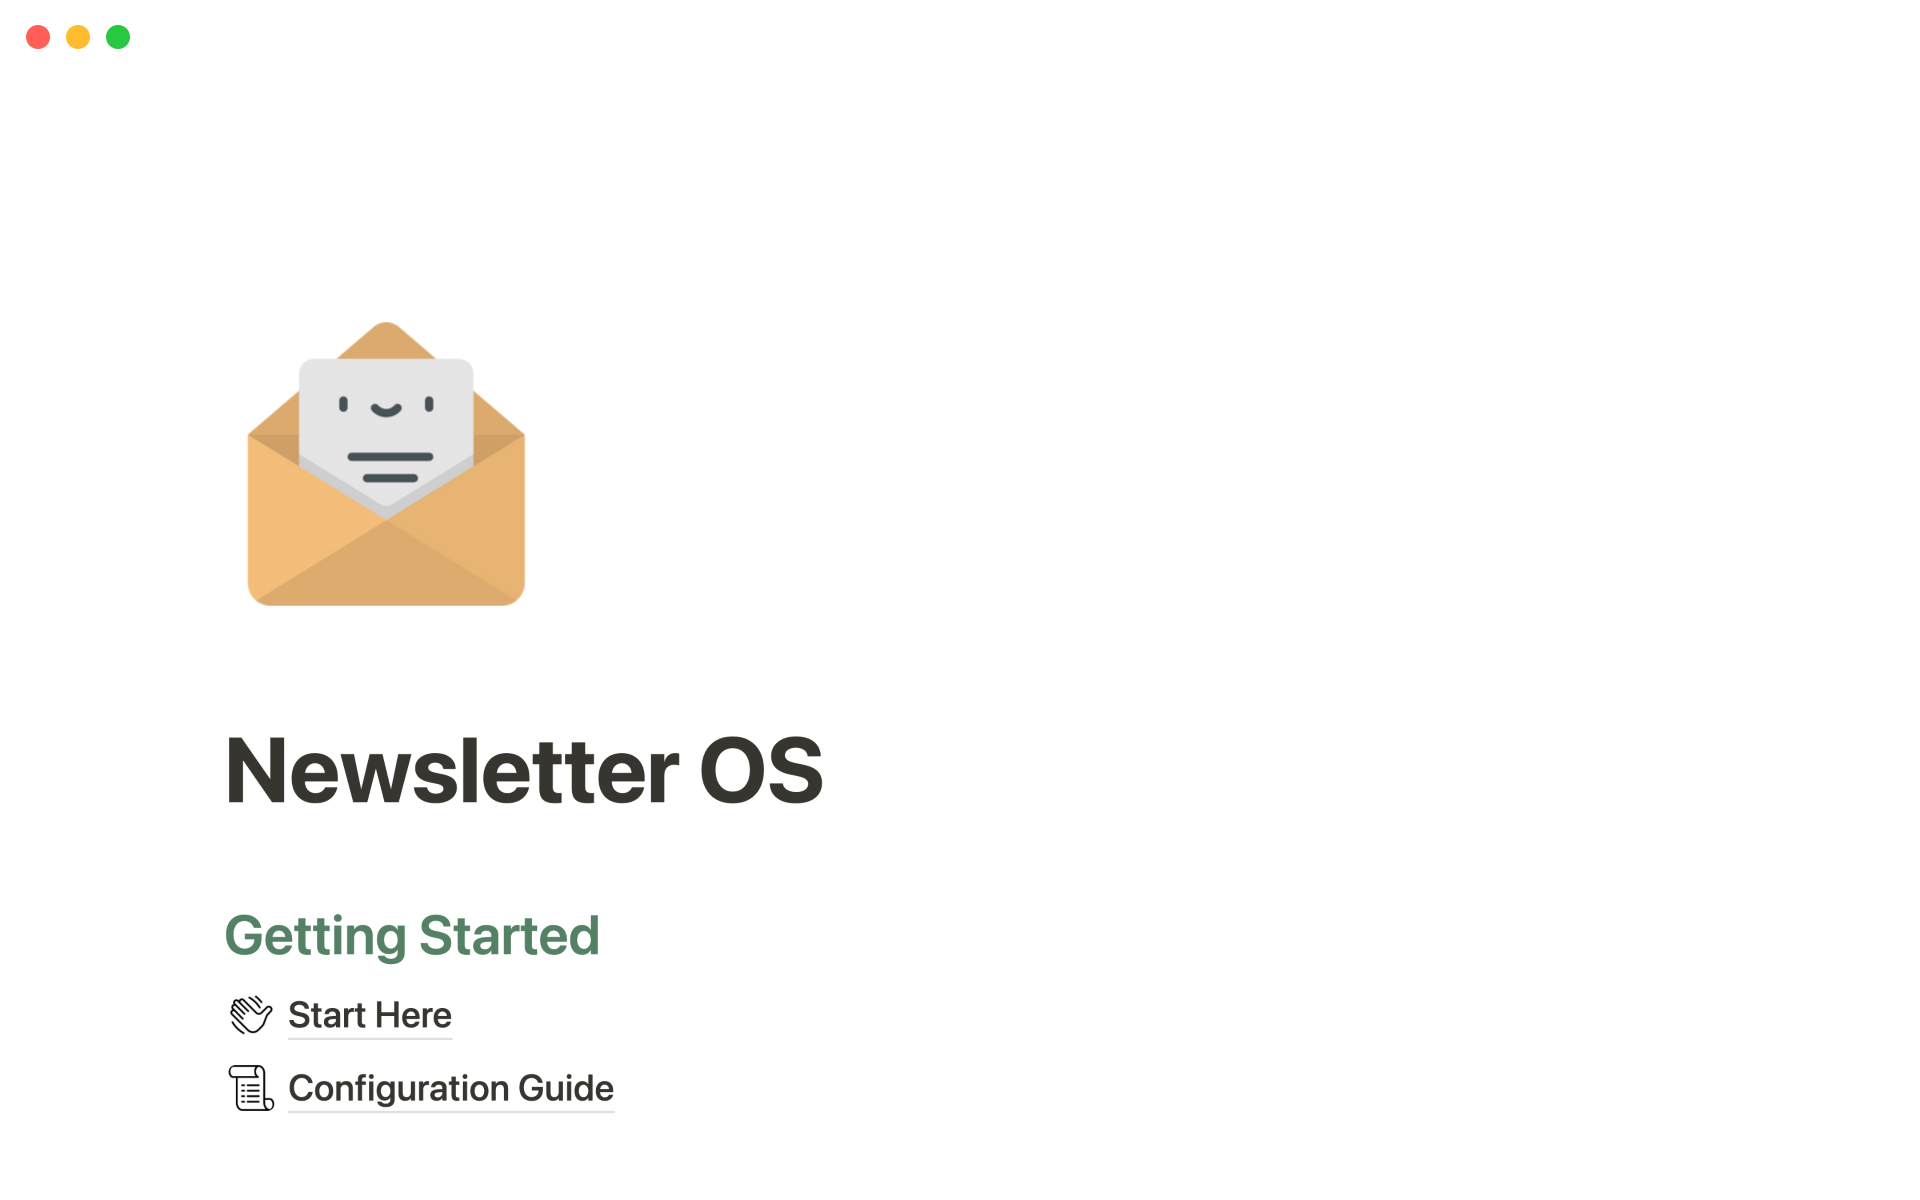 The desktop image for the  Newsletter OS template